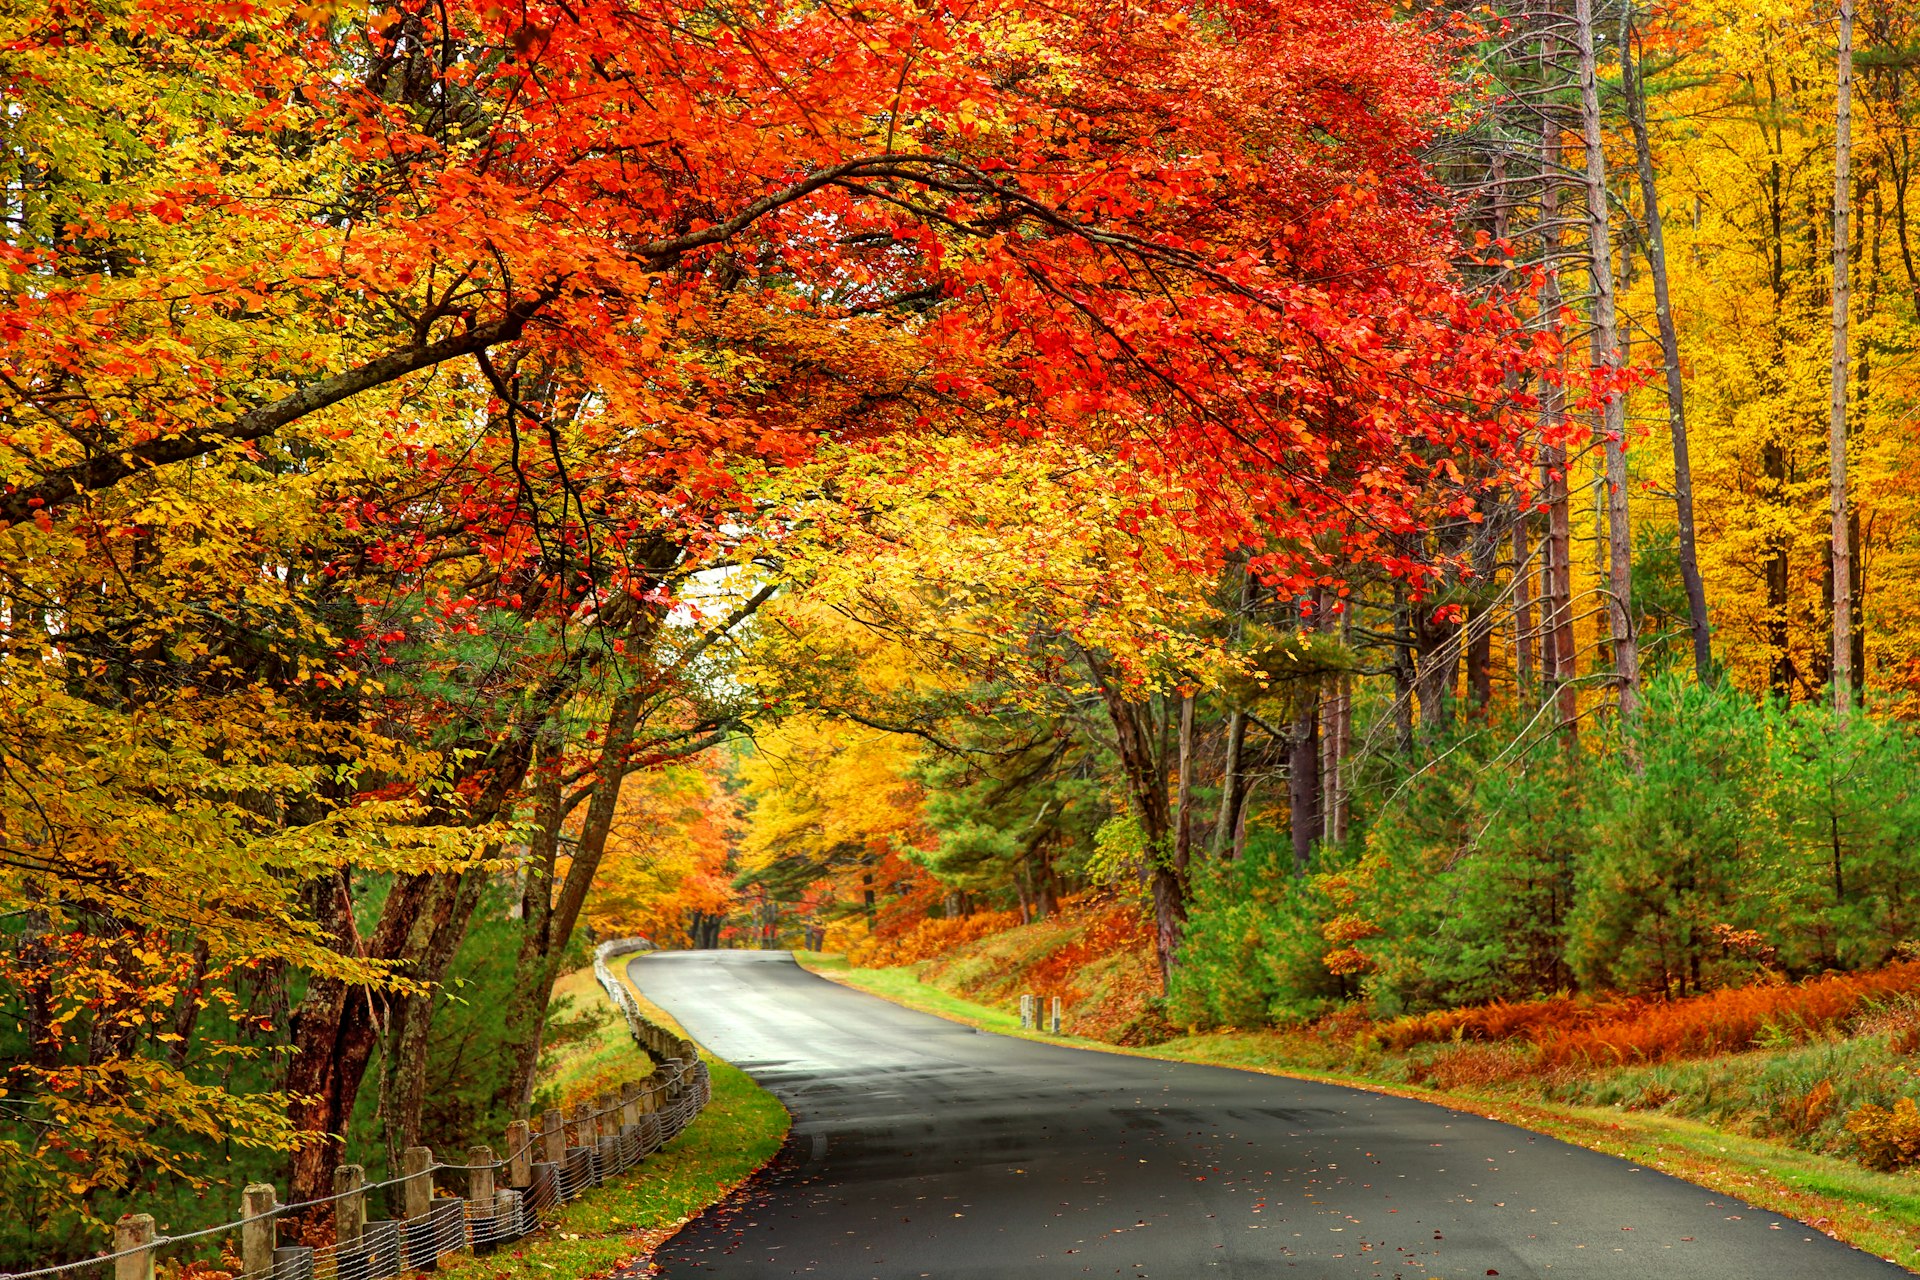 A road lined with fall colors in the Quabbin Reservoir Park area of Massachusetts